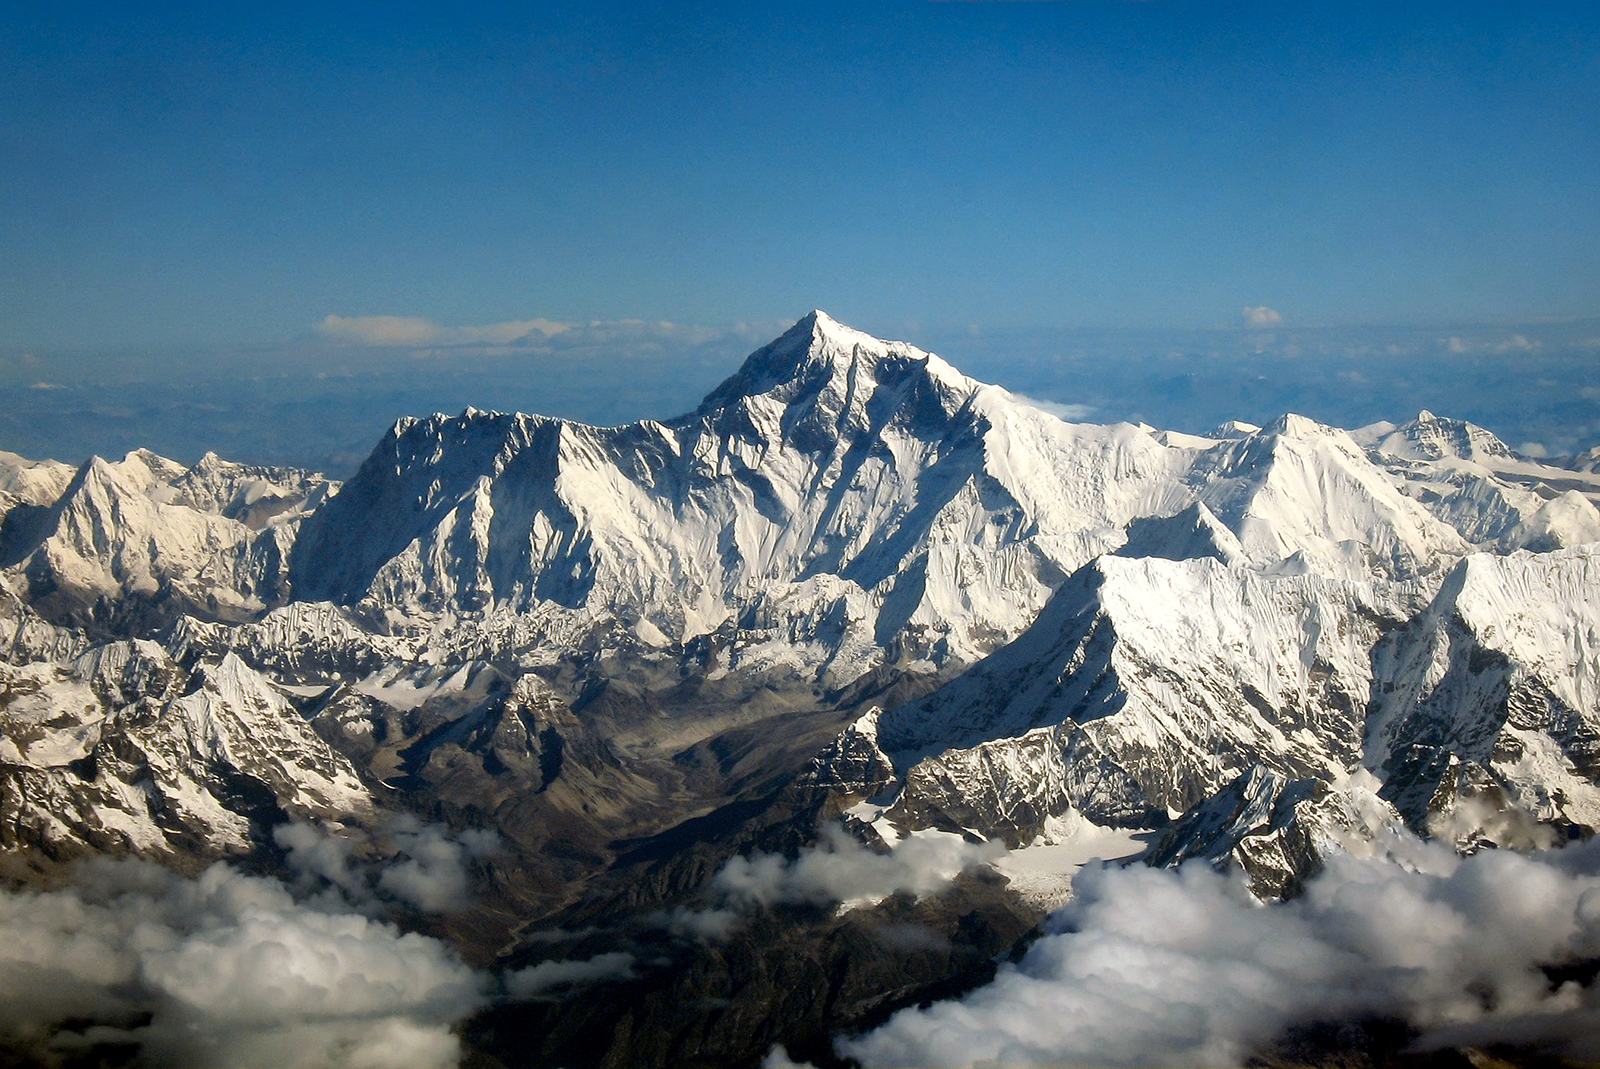 HIGHEST POINT IN THE WORLD- Towering 29,029 feet in the air, the top of Mount Everest is the closest you can get to touching space, while still standing on Earth.